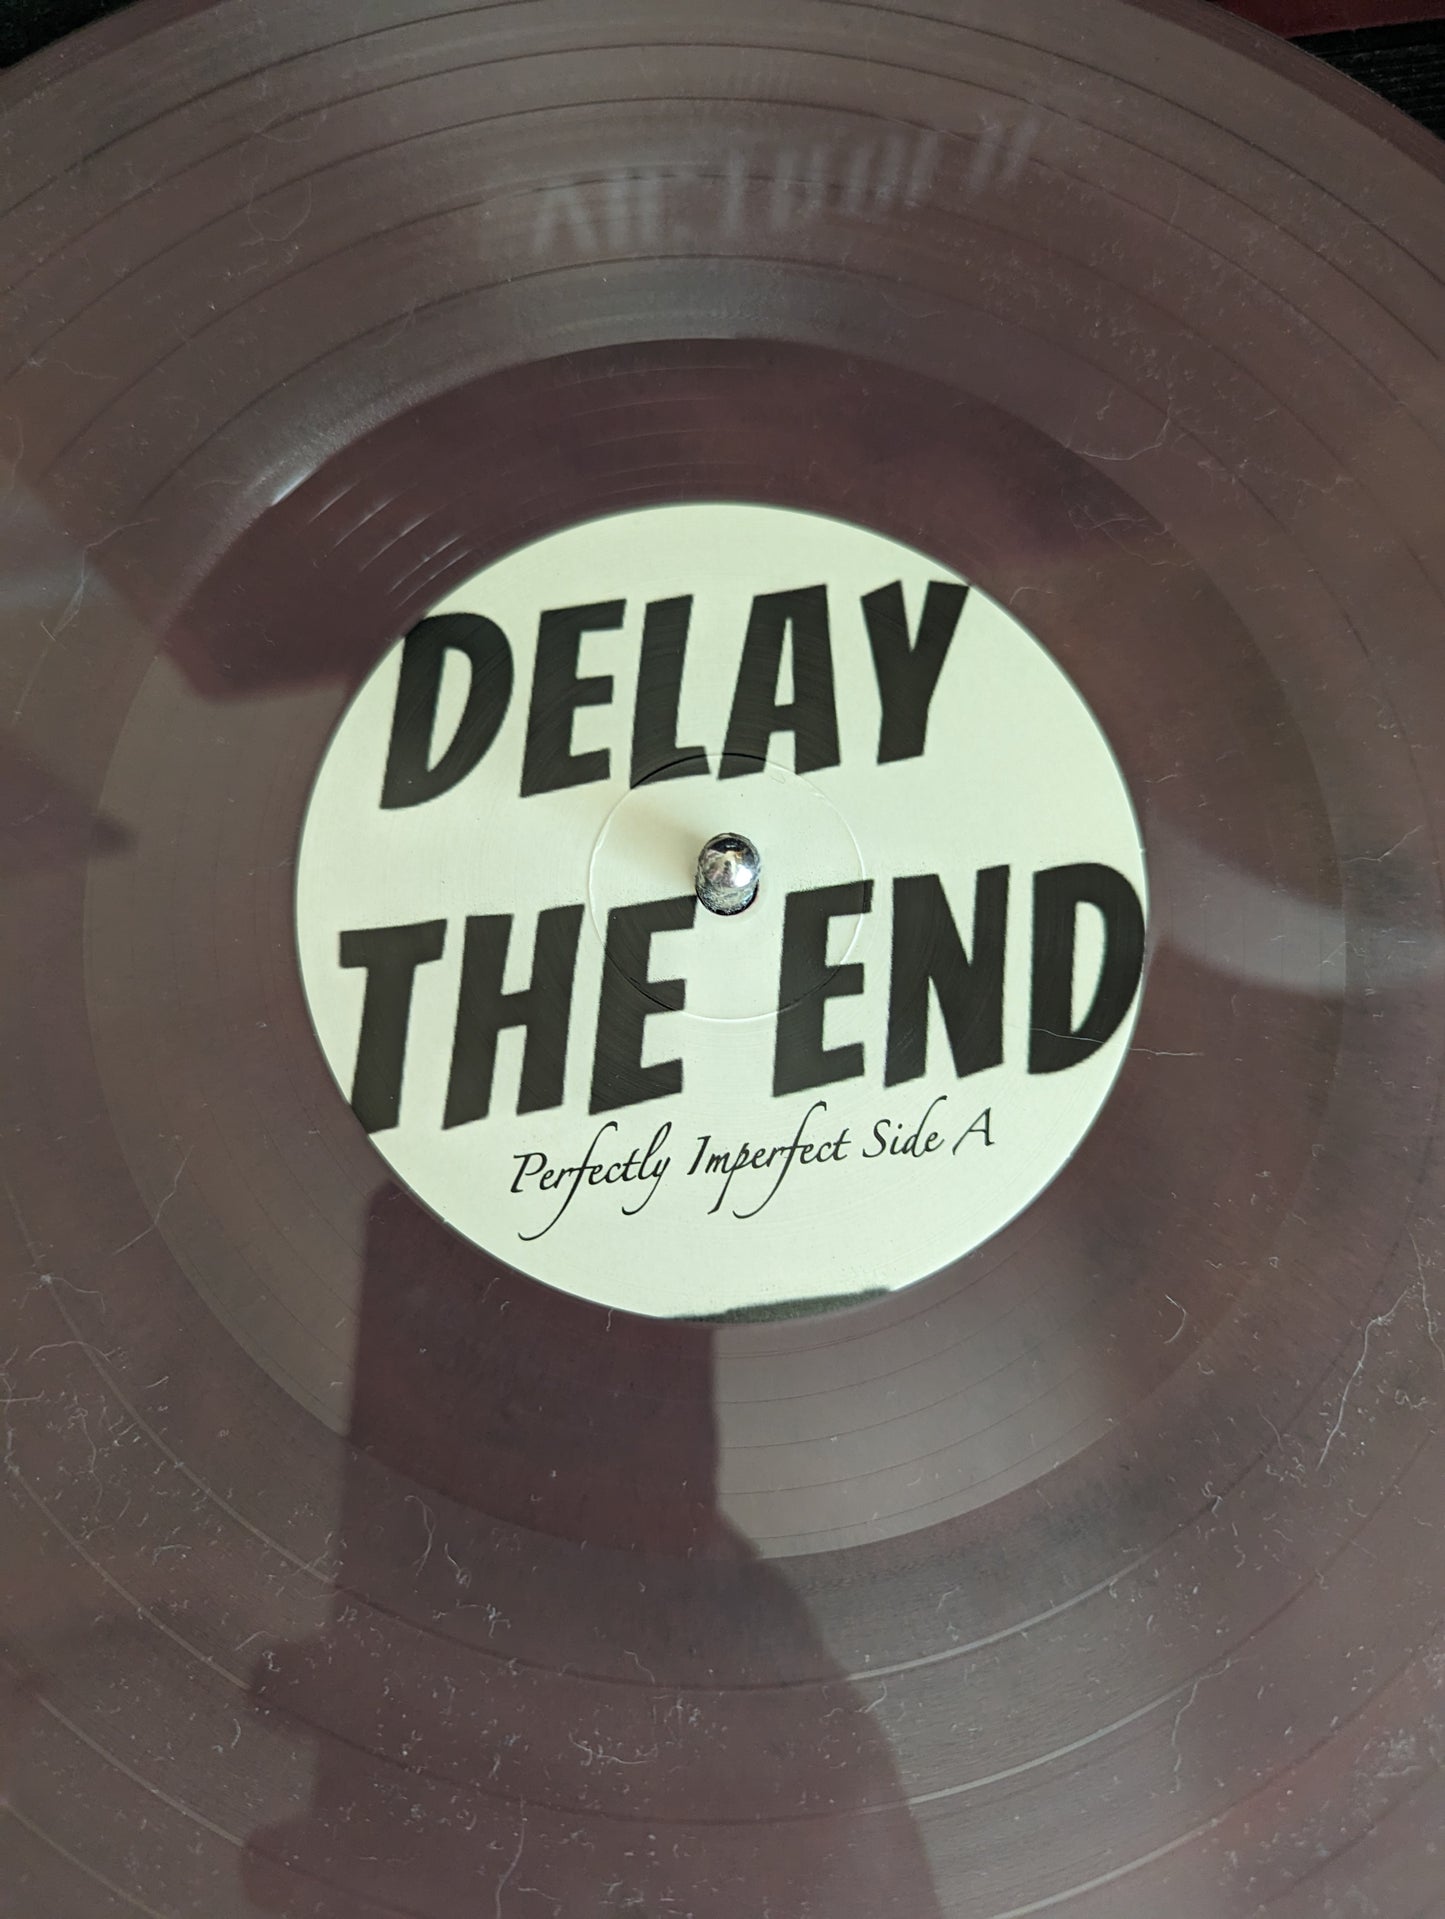 ***NEW*** Delay the End - Perfectly Imperfect 12" Vinyl